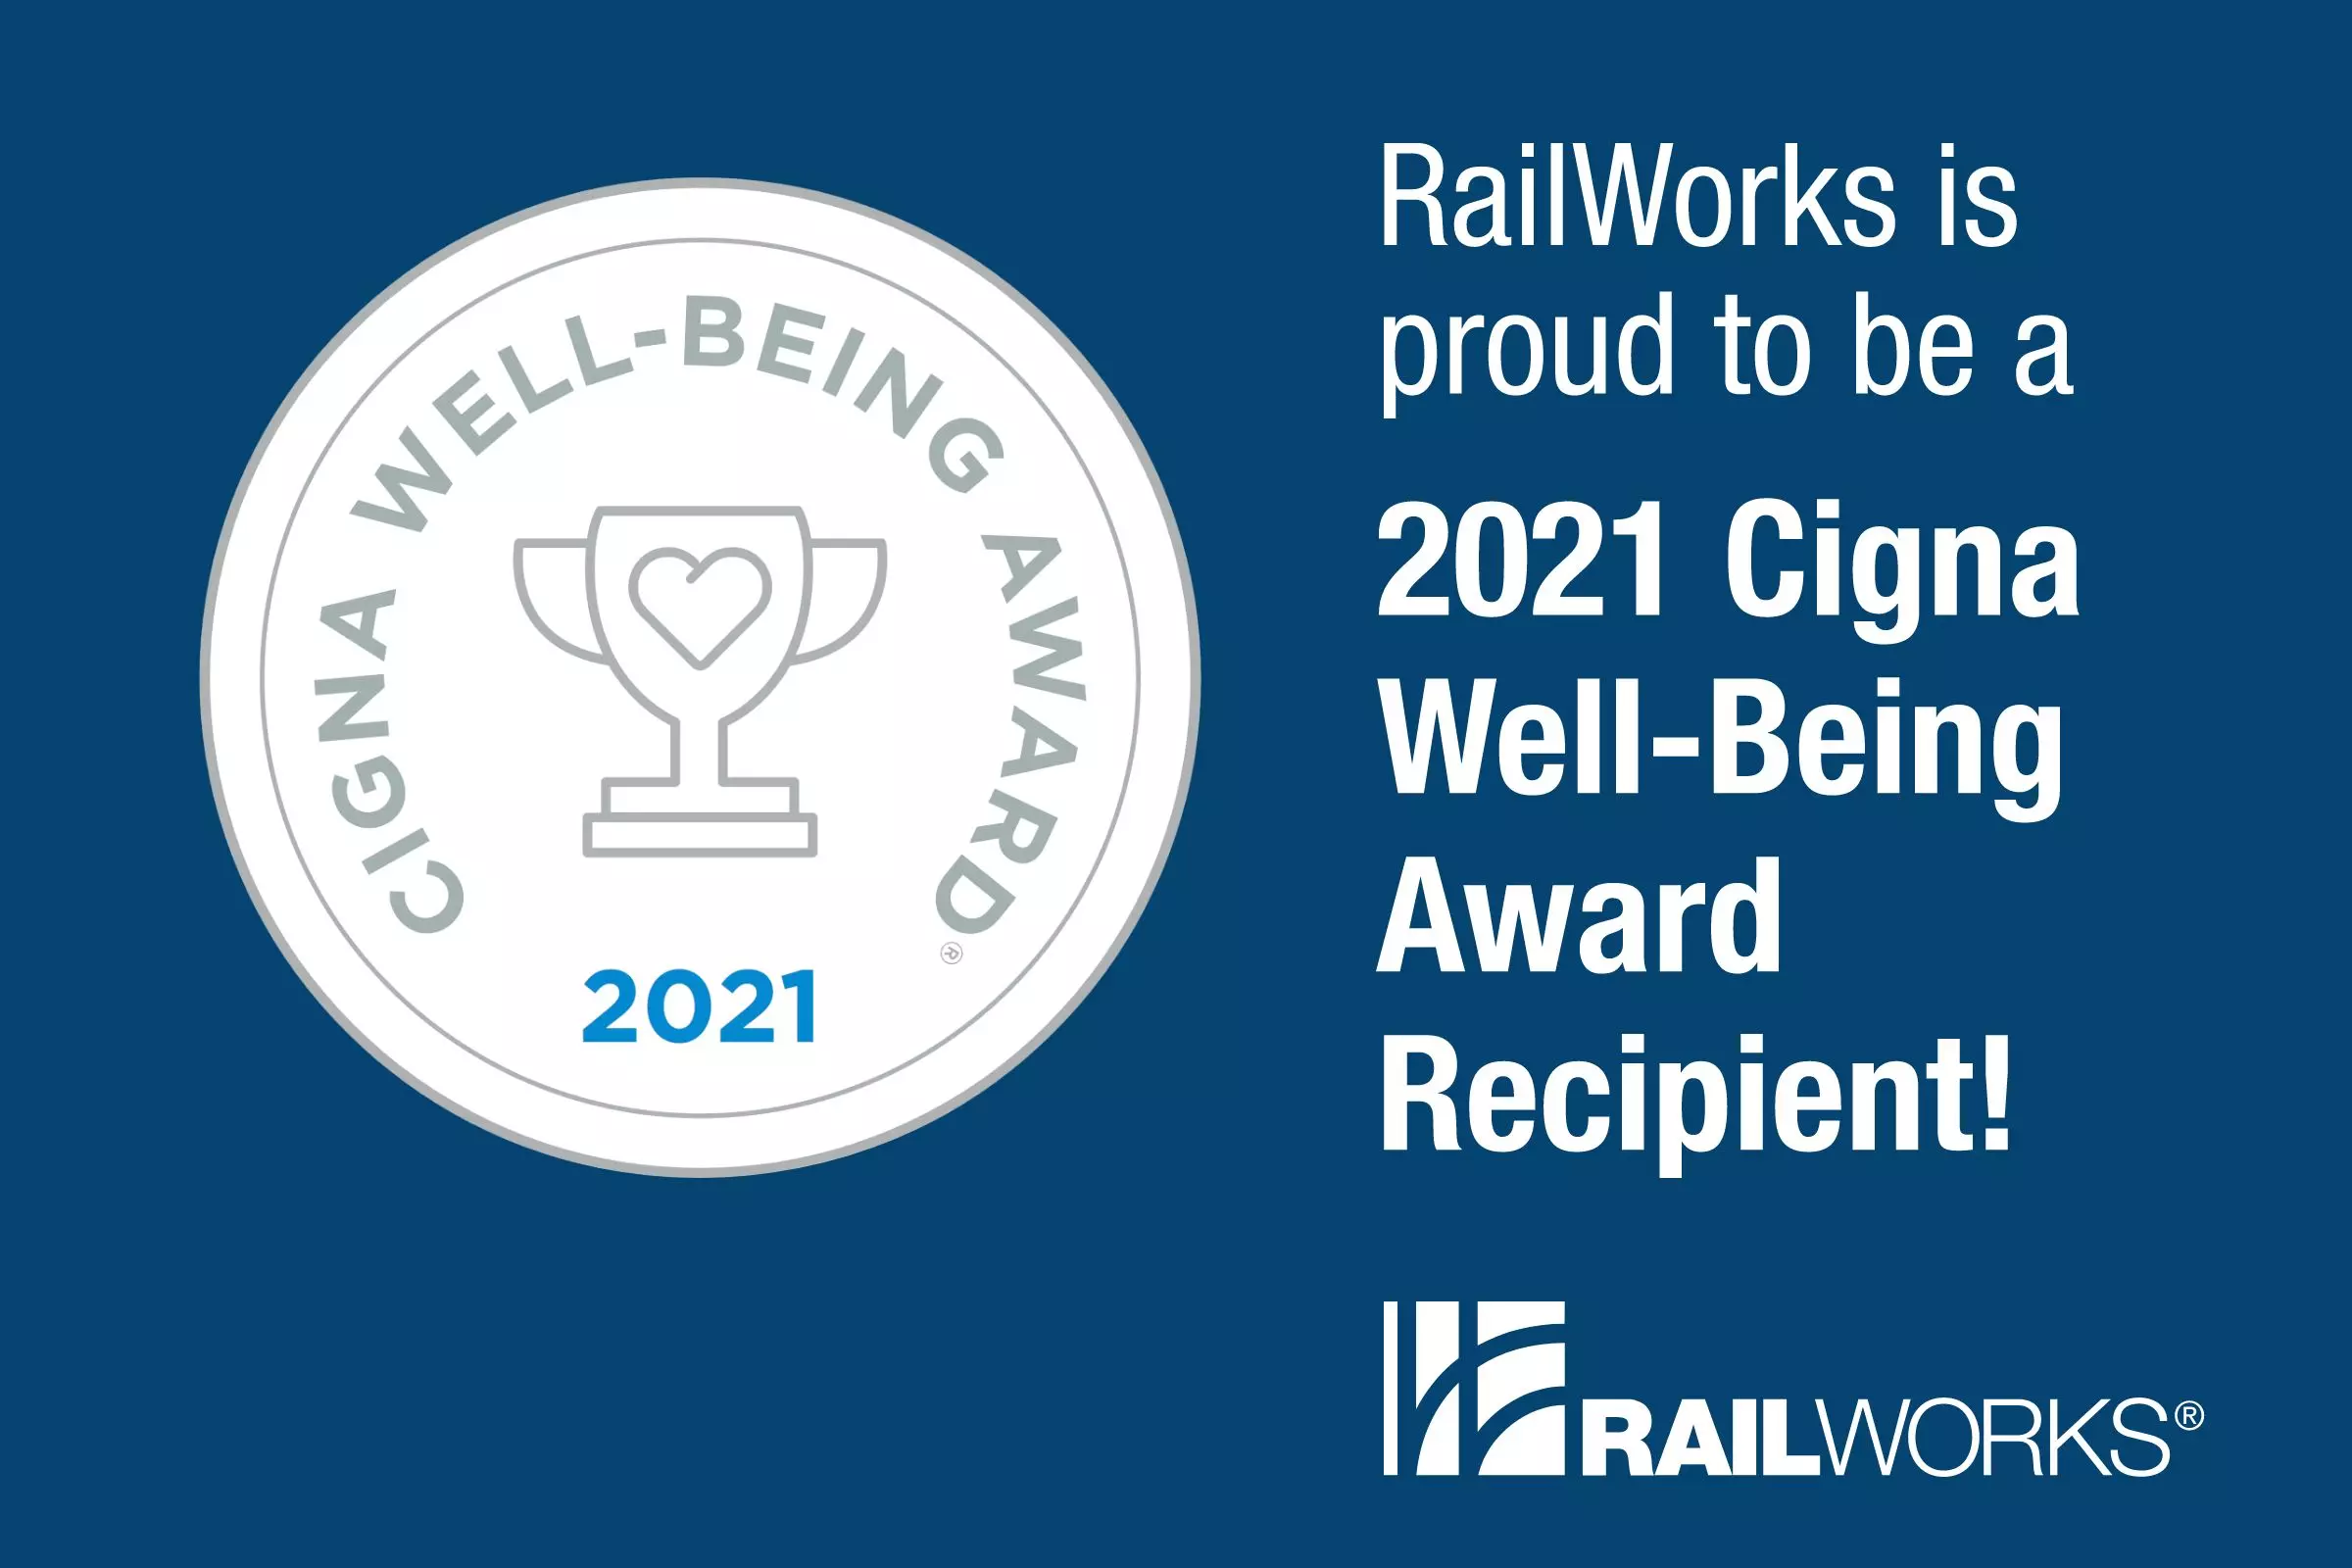 RailWorks is a Cigna 2021 Well-Being Award Recipient